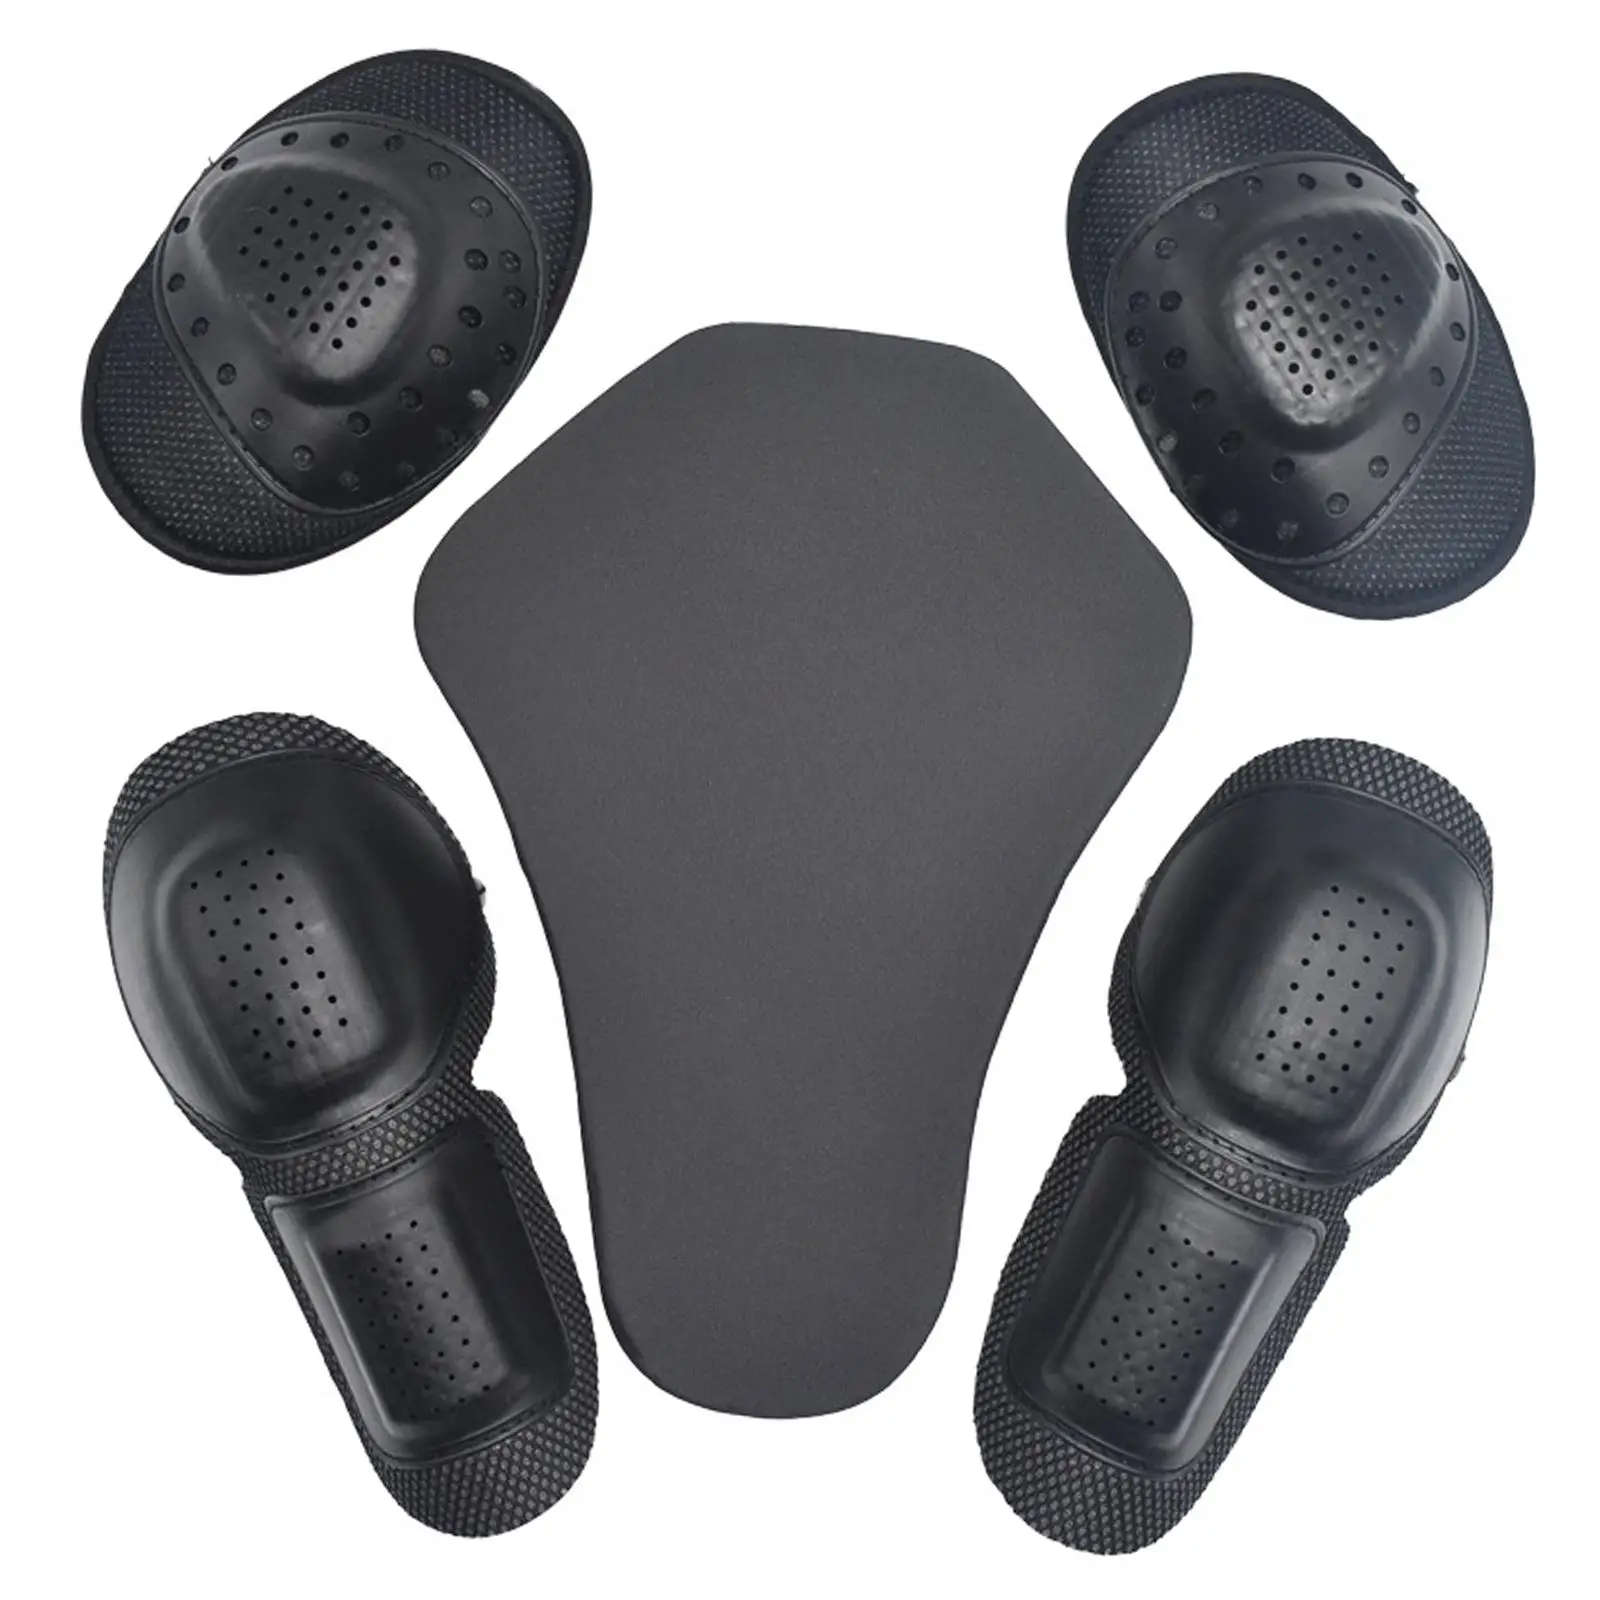 5x Riding Shoulder Protector Removable Motorcycle Fit for Riding